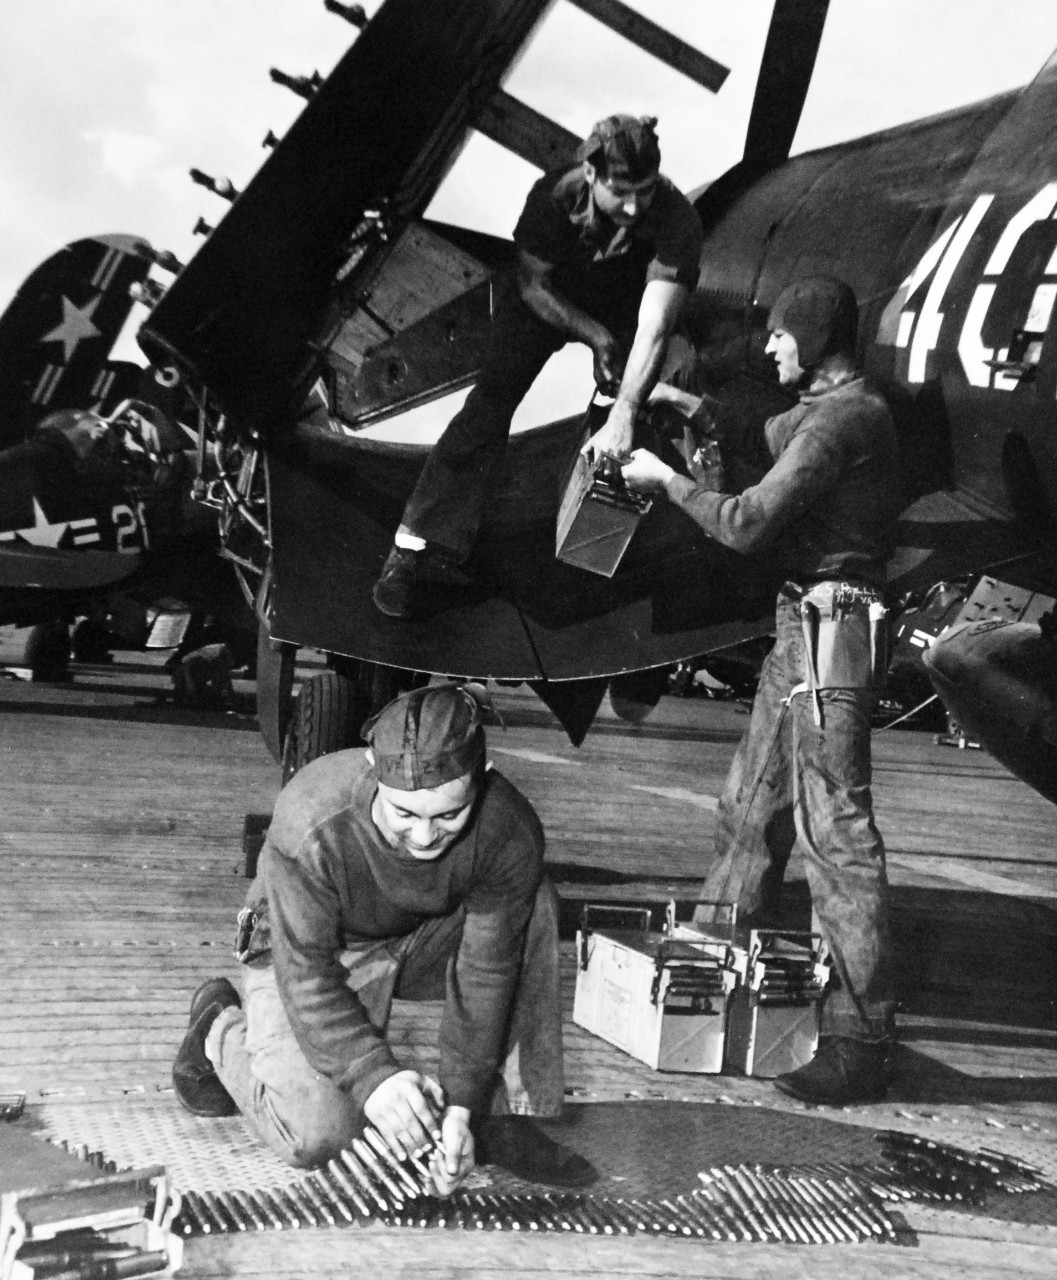 80-G-420997:   Vought F4U Corsair, September 1950.   Ordnance crew arms a F4U “Corsair” with 50 Cal. Ammunition on flight deck of USS Boxer (CV-21) with Task Force 77 in Korea.  Shown:  Ordnanceman Second Class Francis L. Diamond on wing;  and Airmen William J. Ewsuk and Joseph F. Bellina both kneeling.   Photographed on 21 September 1950.  Official U.S. Navy Photograph, now in the collections of the National Archives.  